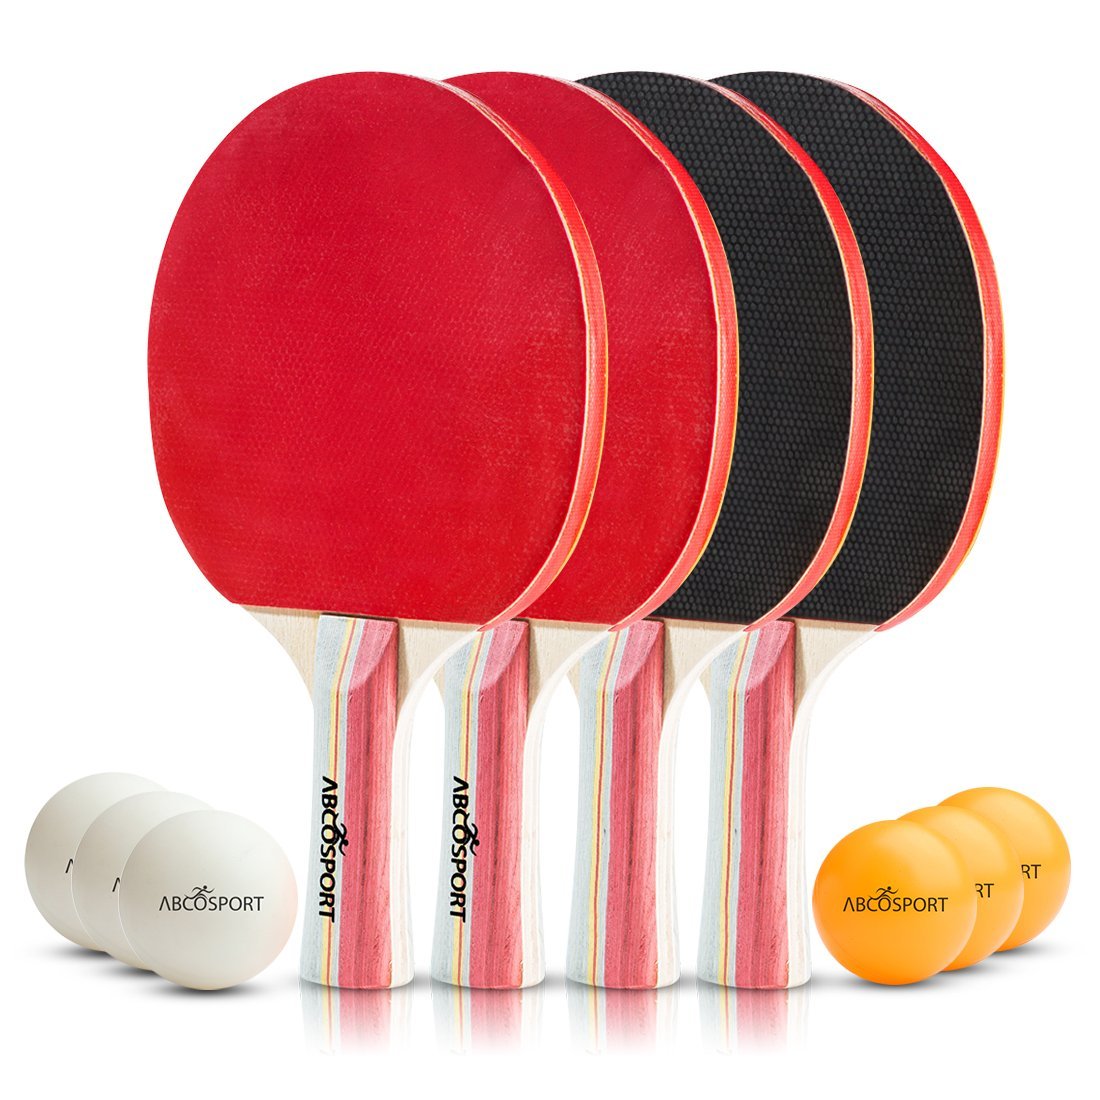 4 Player Pack;Pro Premium Table Tennis Racket Set; Good Spin;8 Professional Game 